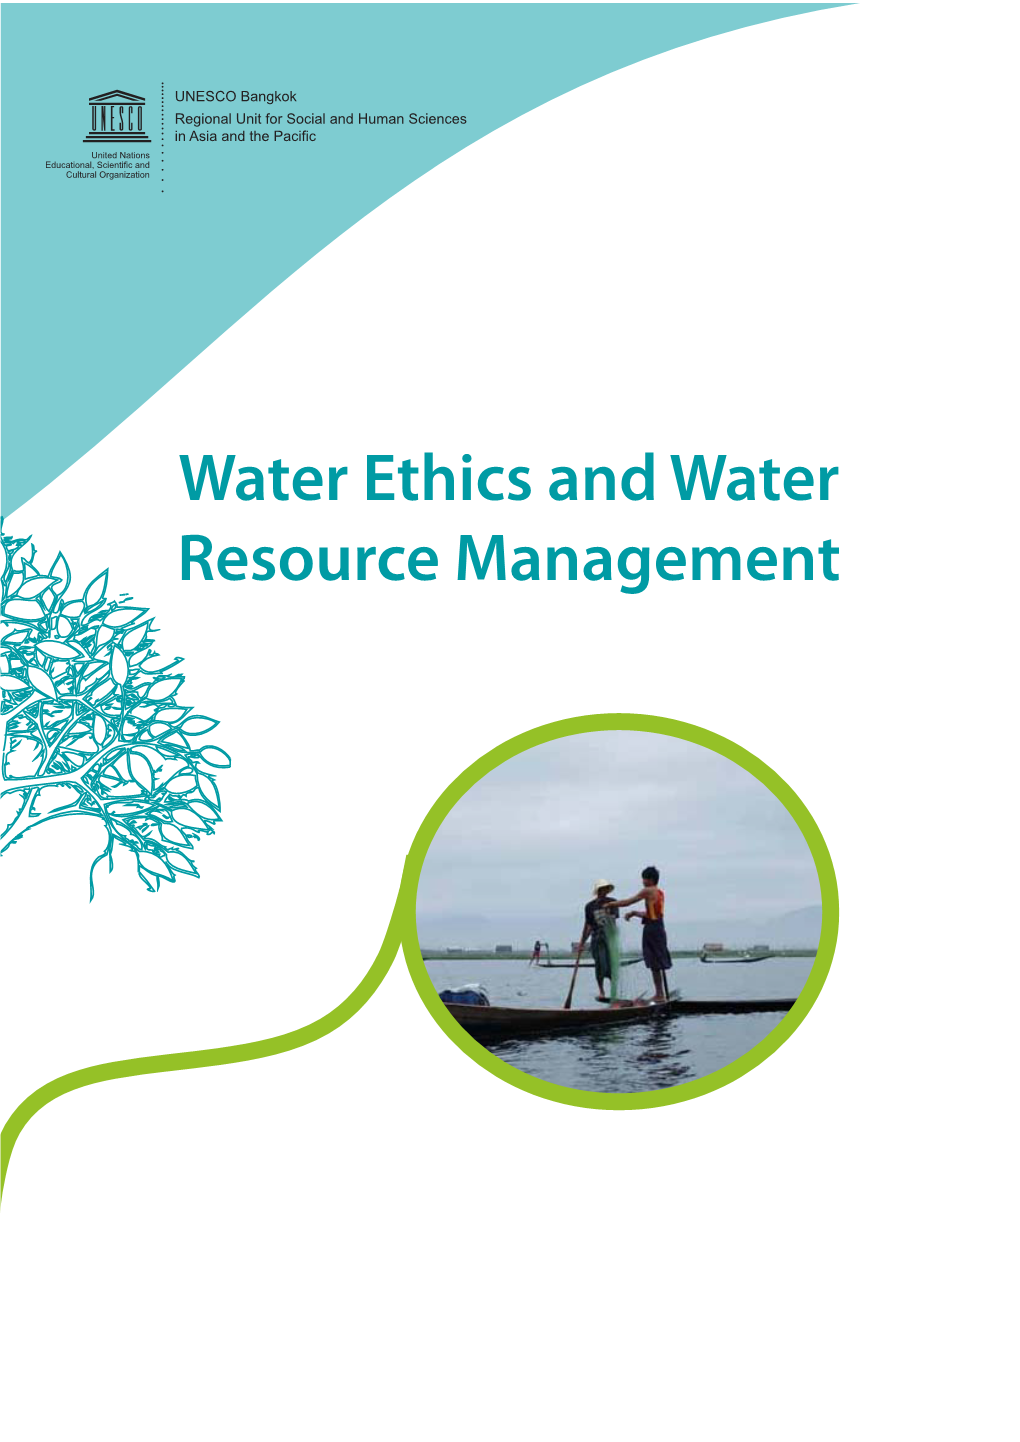 Water Ethics and Water Resource Management Ethics and Climate Change in Asia and the Pacific (ECCAP) Project